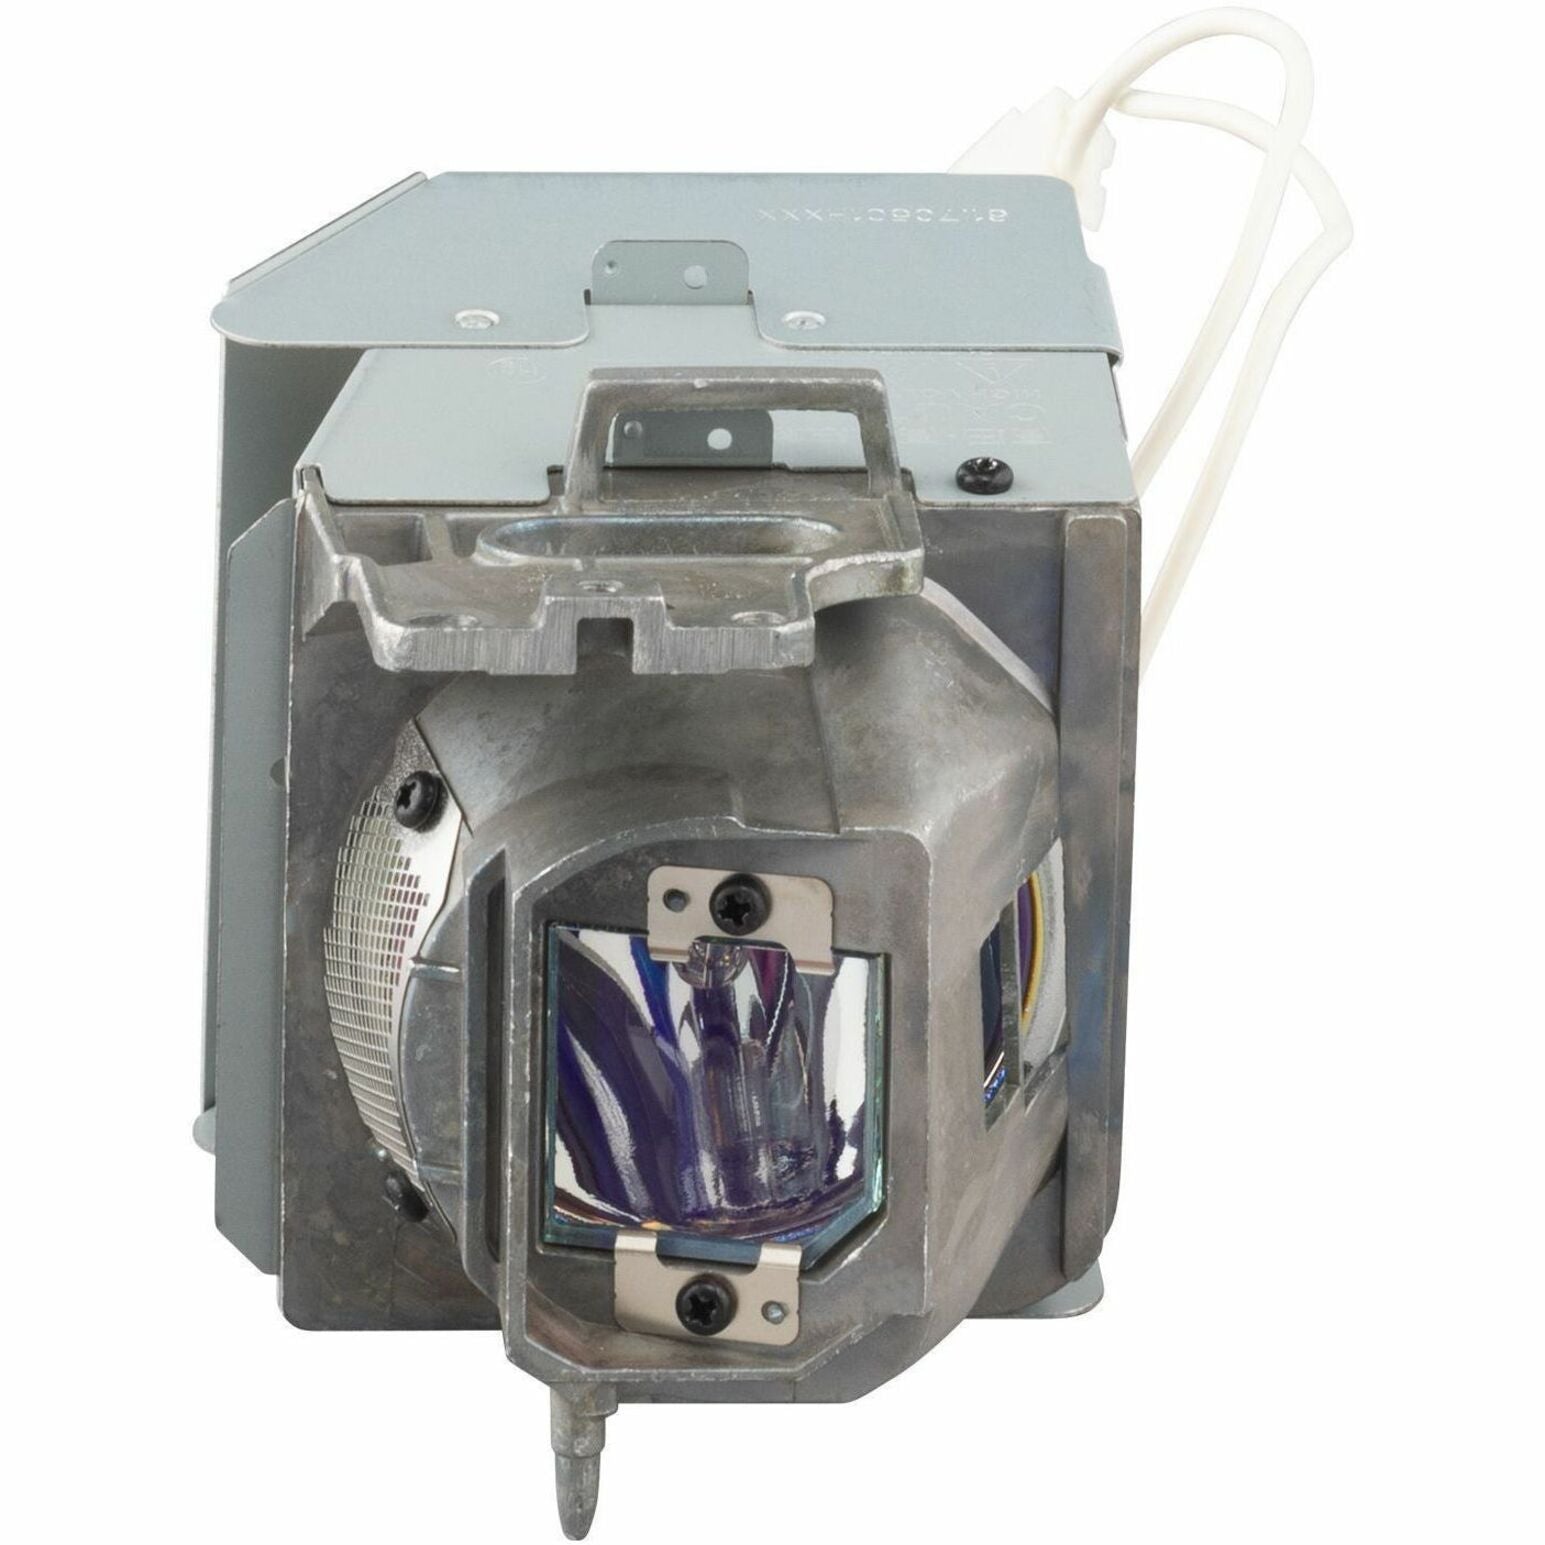 ViewSonic RLC-128 Projector Replacement Lamp for PA700W/PA700X/PA700S/PS502W/PS502X